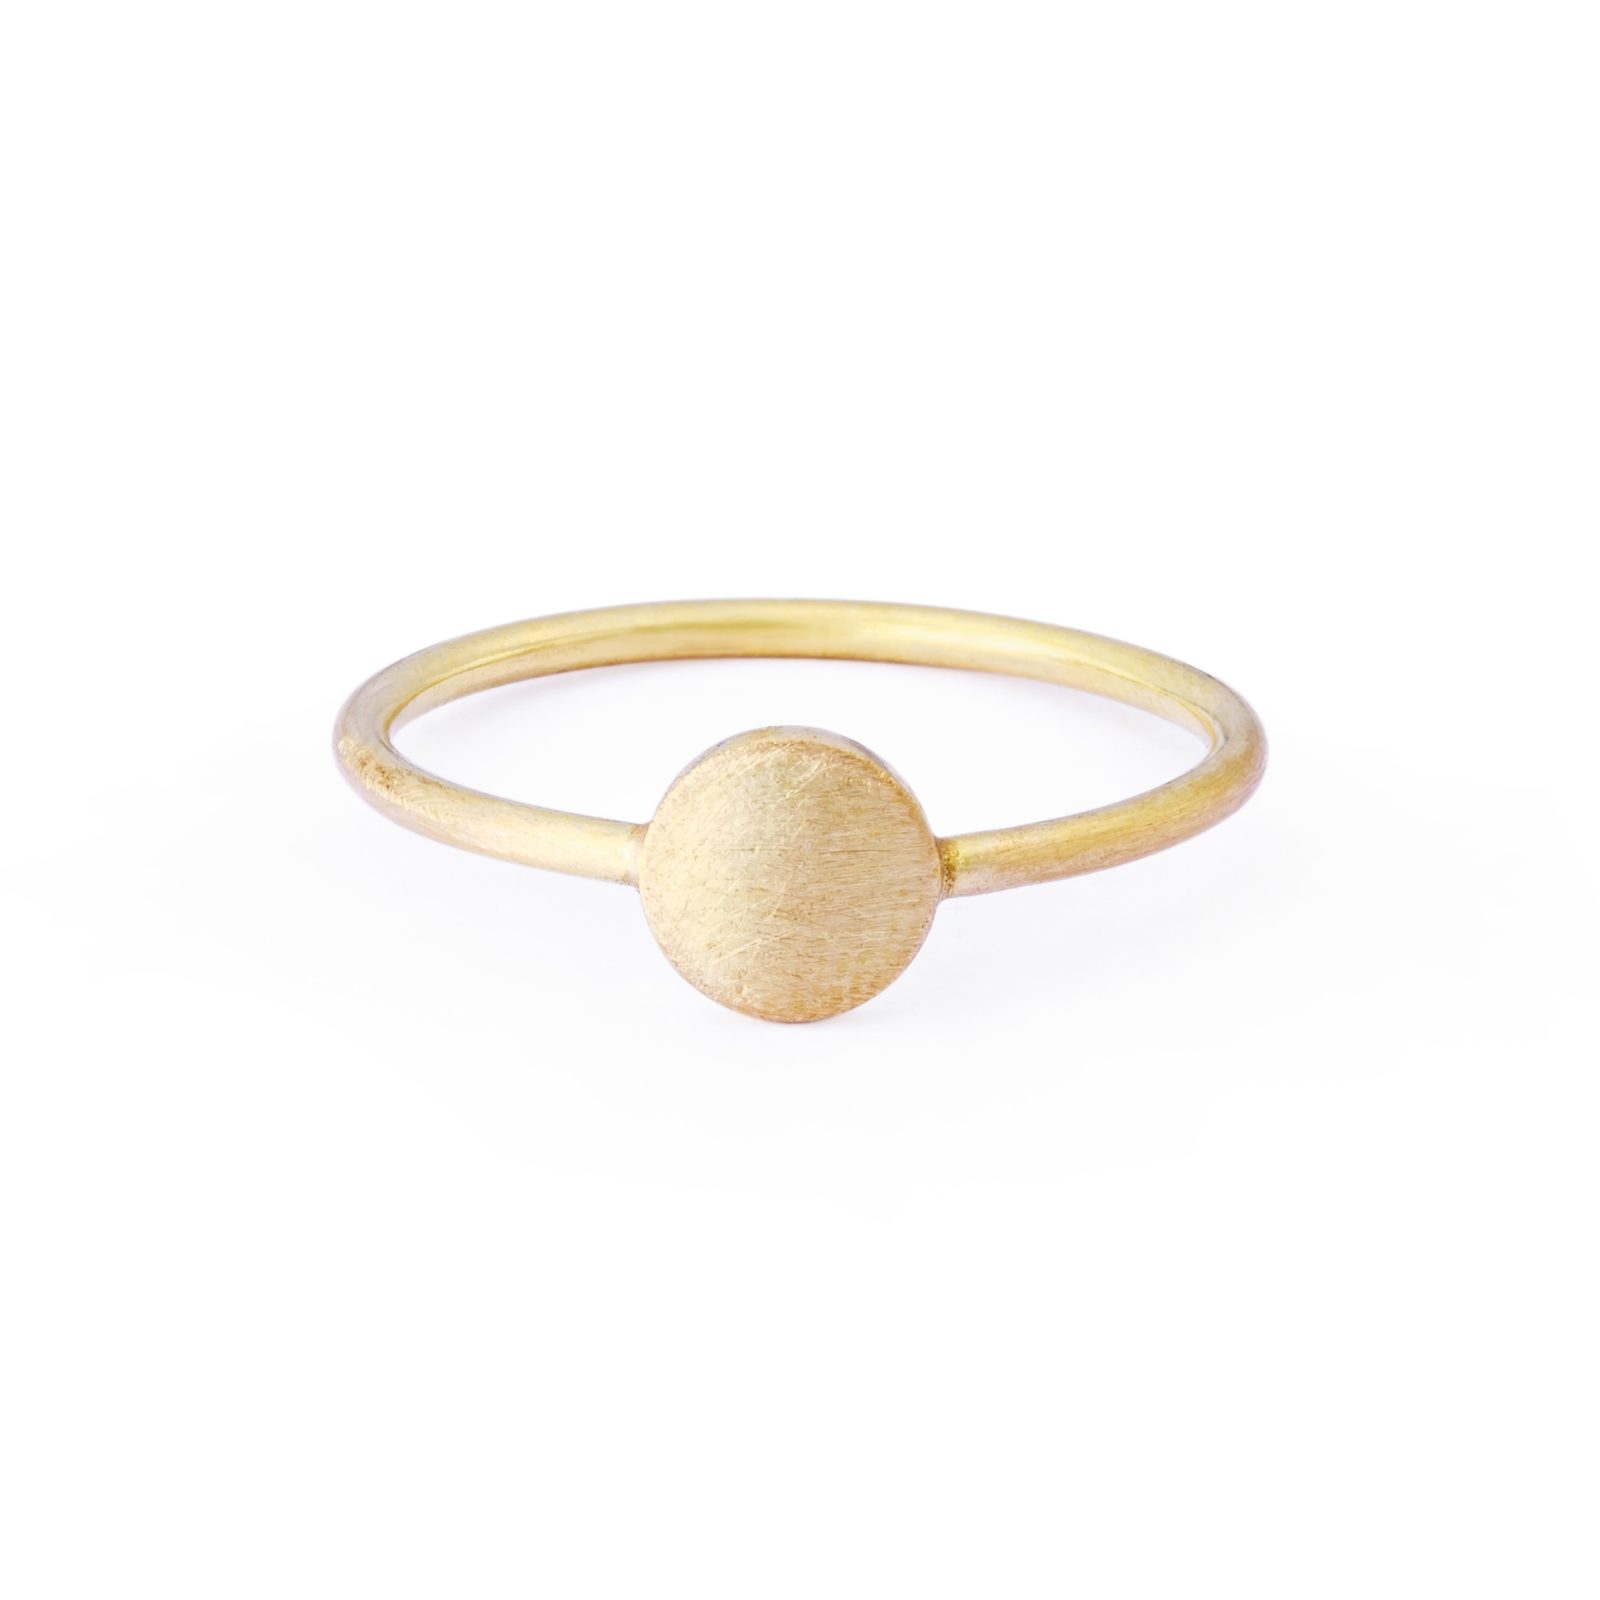 Sia Taylor KR1 Y Yellow Gold 5mm Moon Ring WB